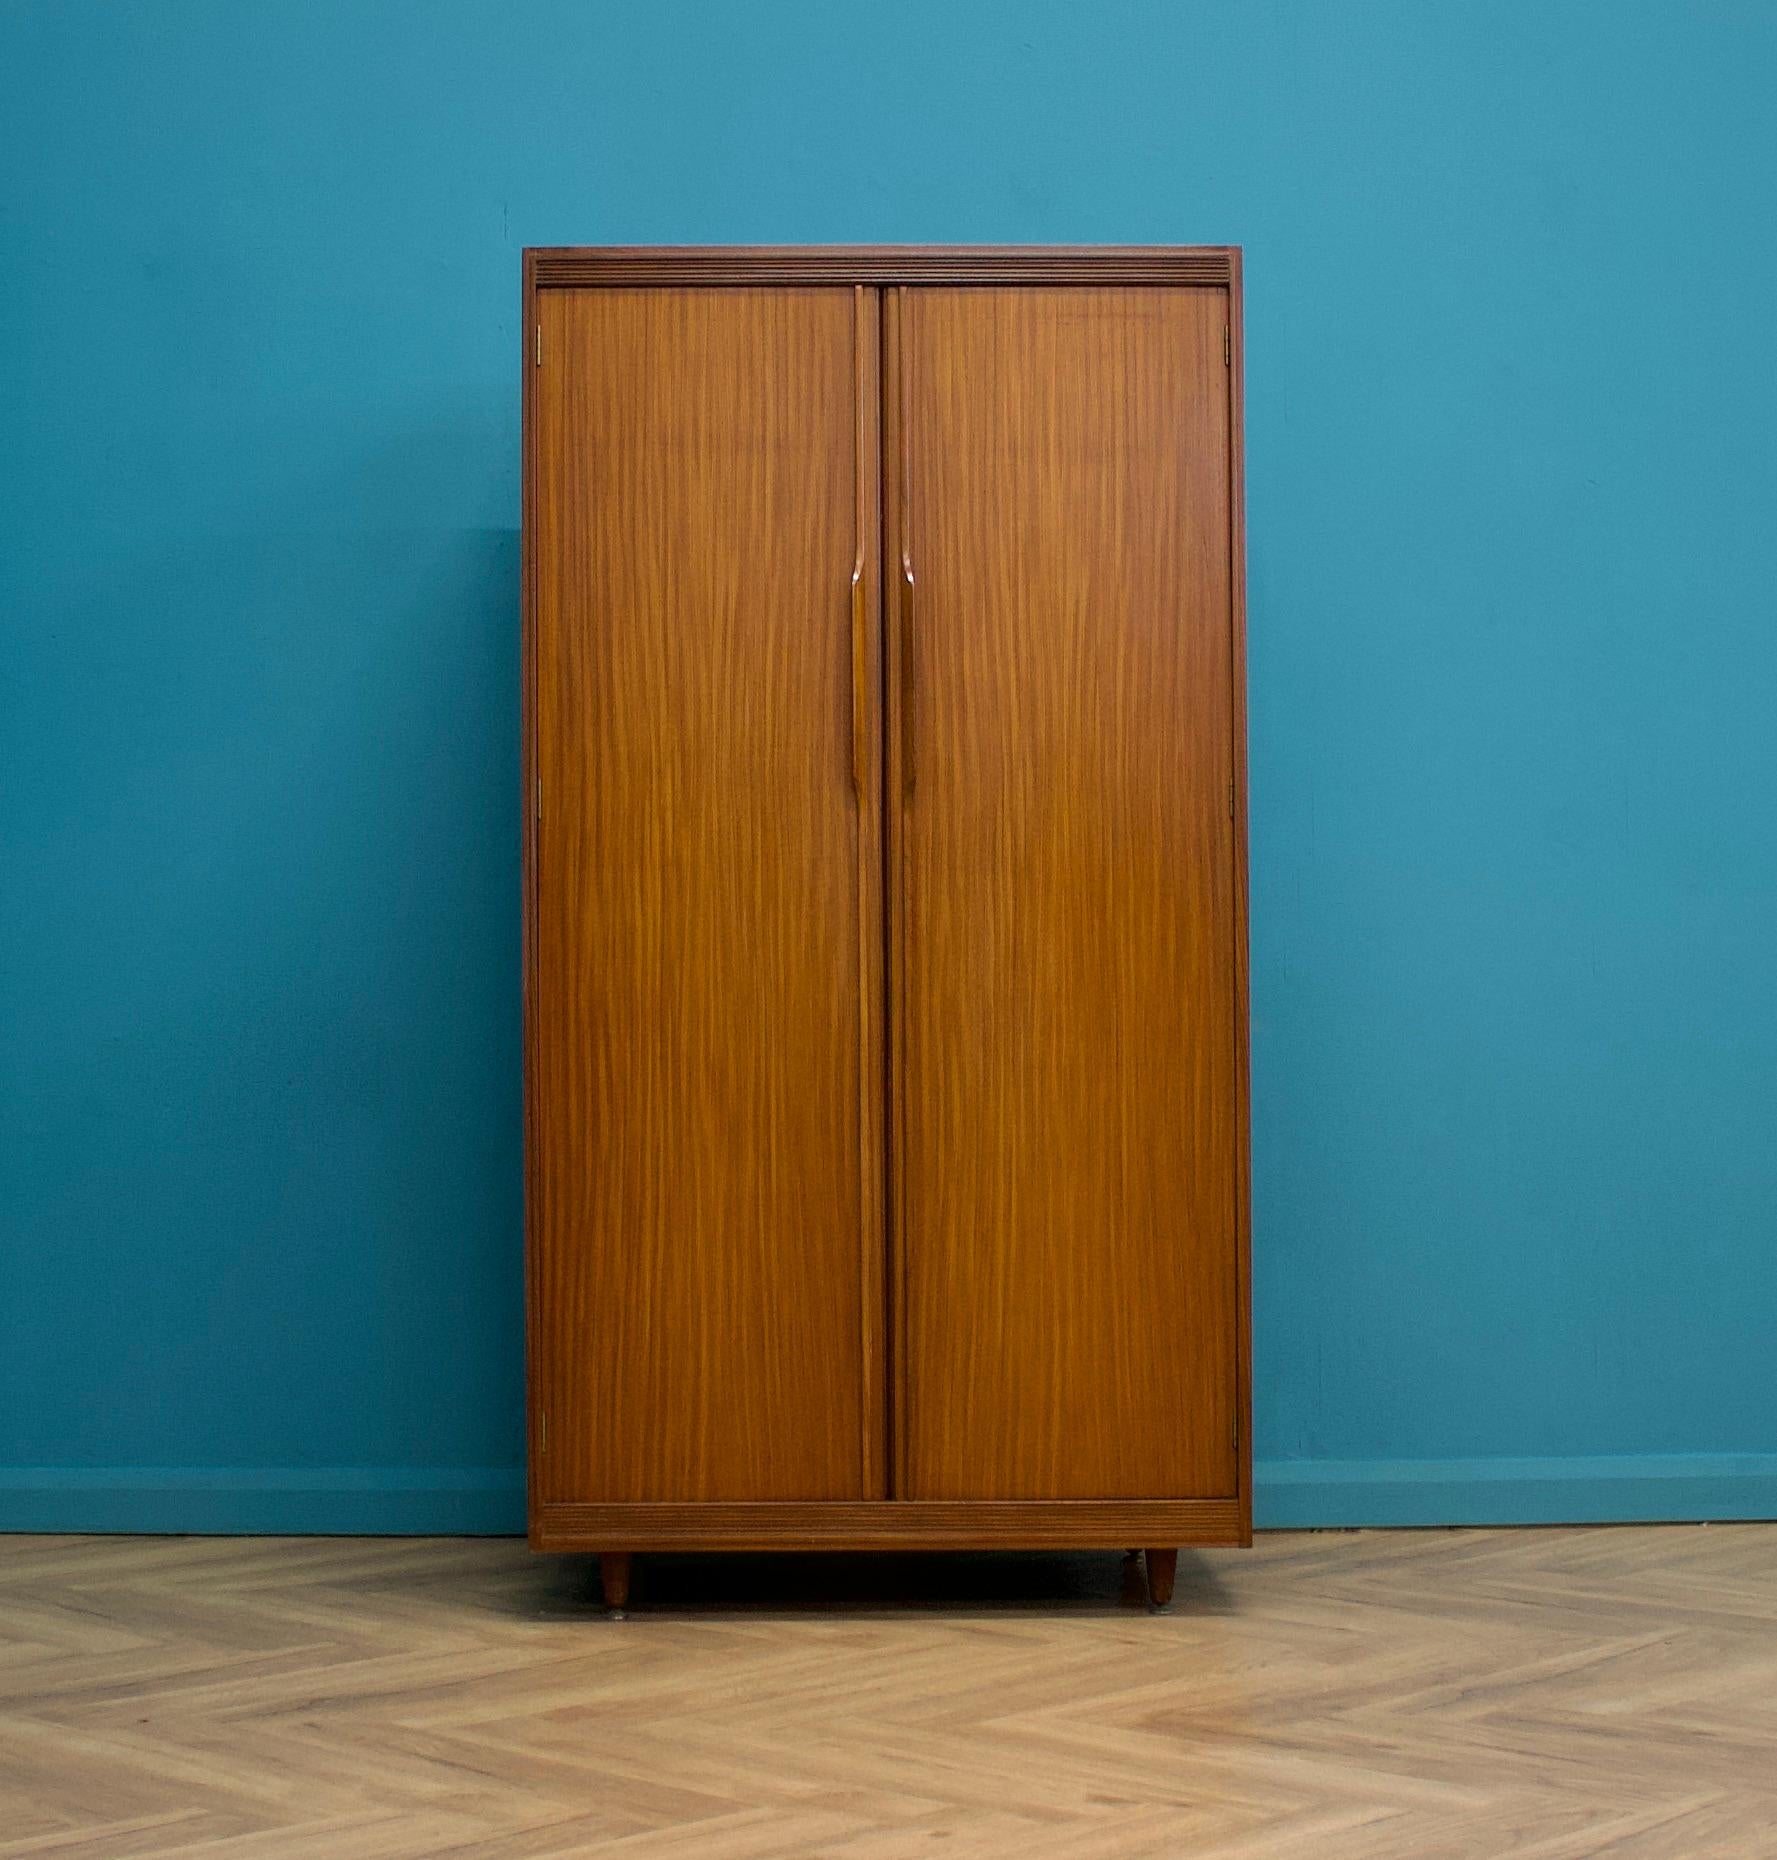 A freestanding double door teak wardrobe from White & Newton-  in the Danish modern style
Made during the 1960s


Fitted out with a clothes rail, drawers, a compartment and shelving for ample storage in such a compact piece
The style of this